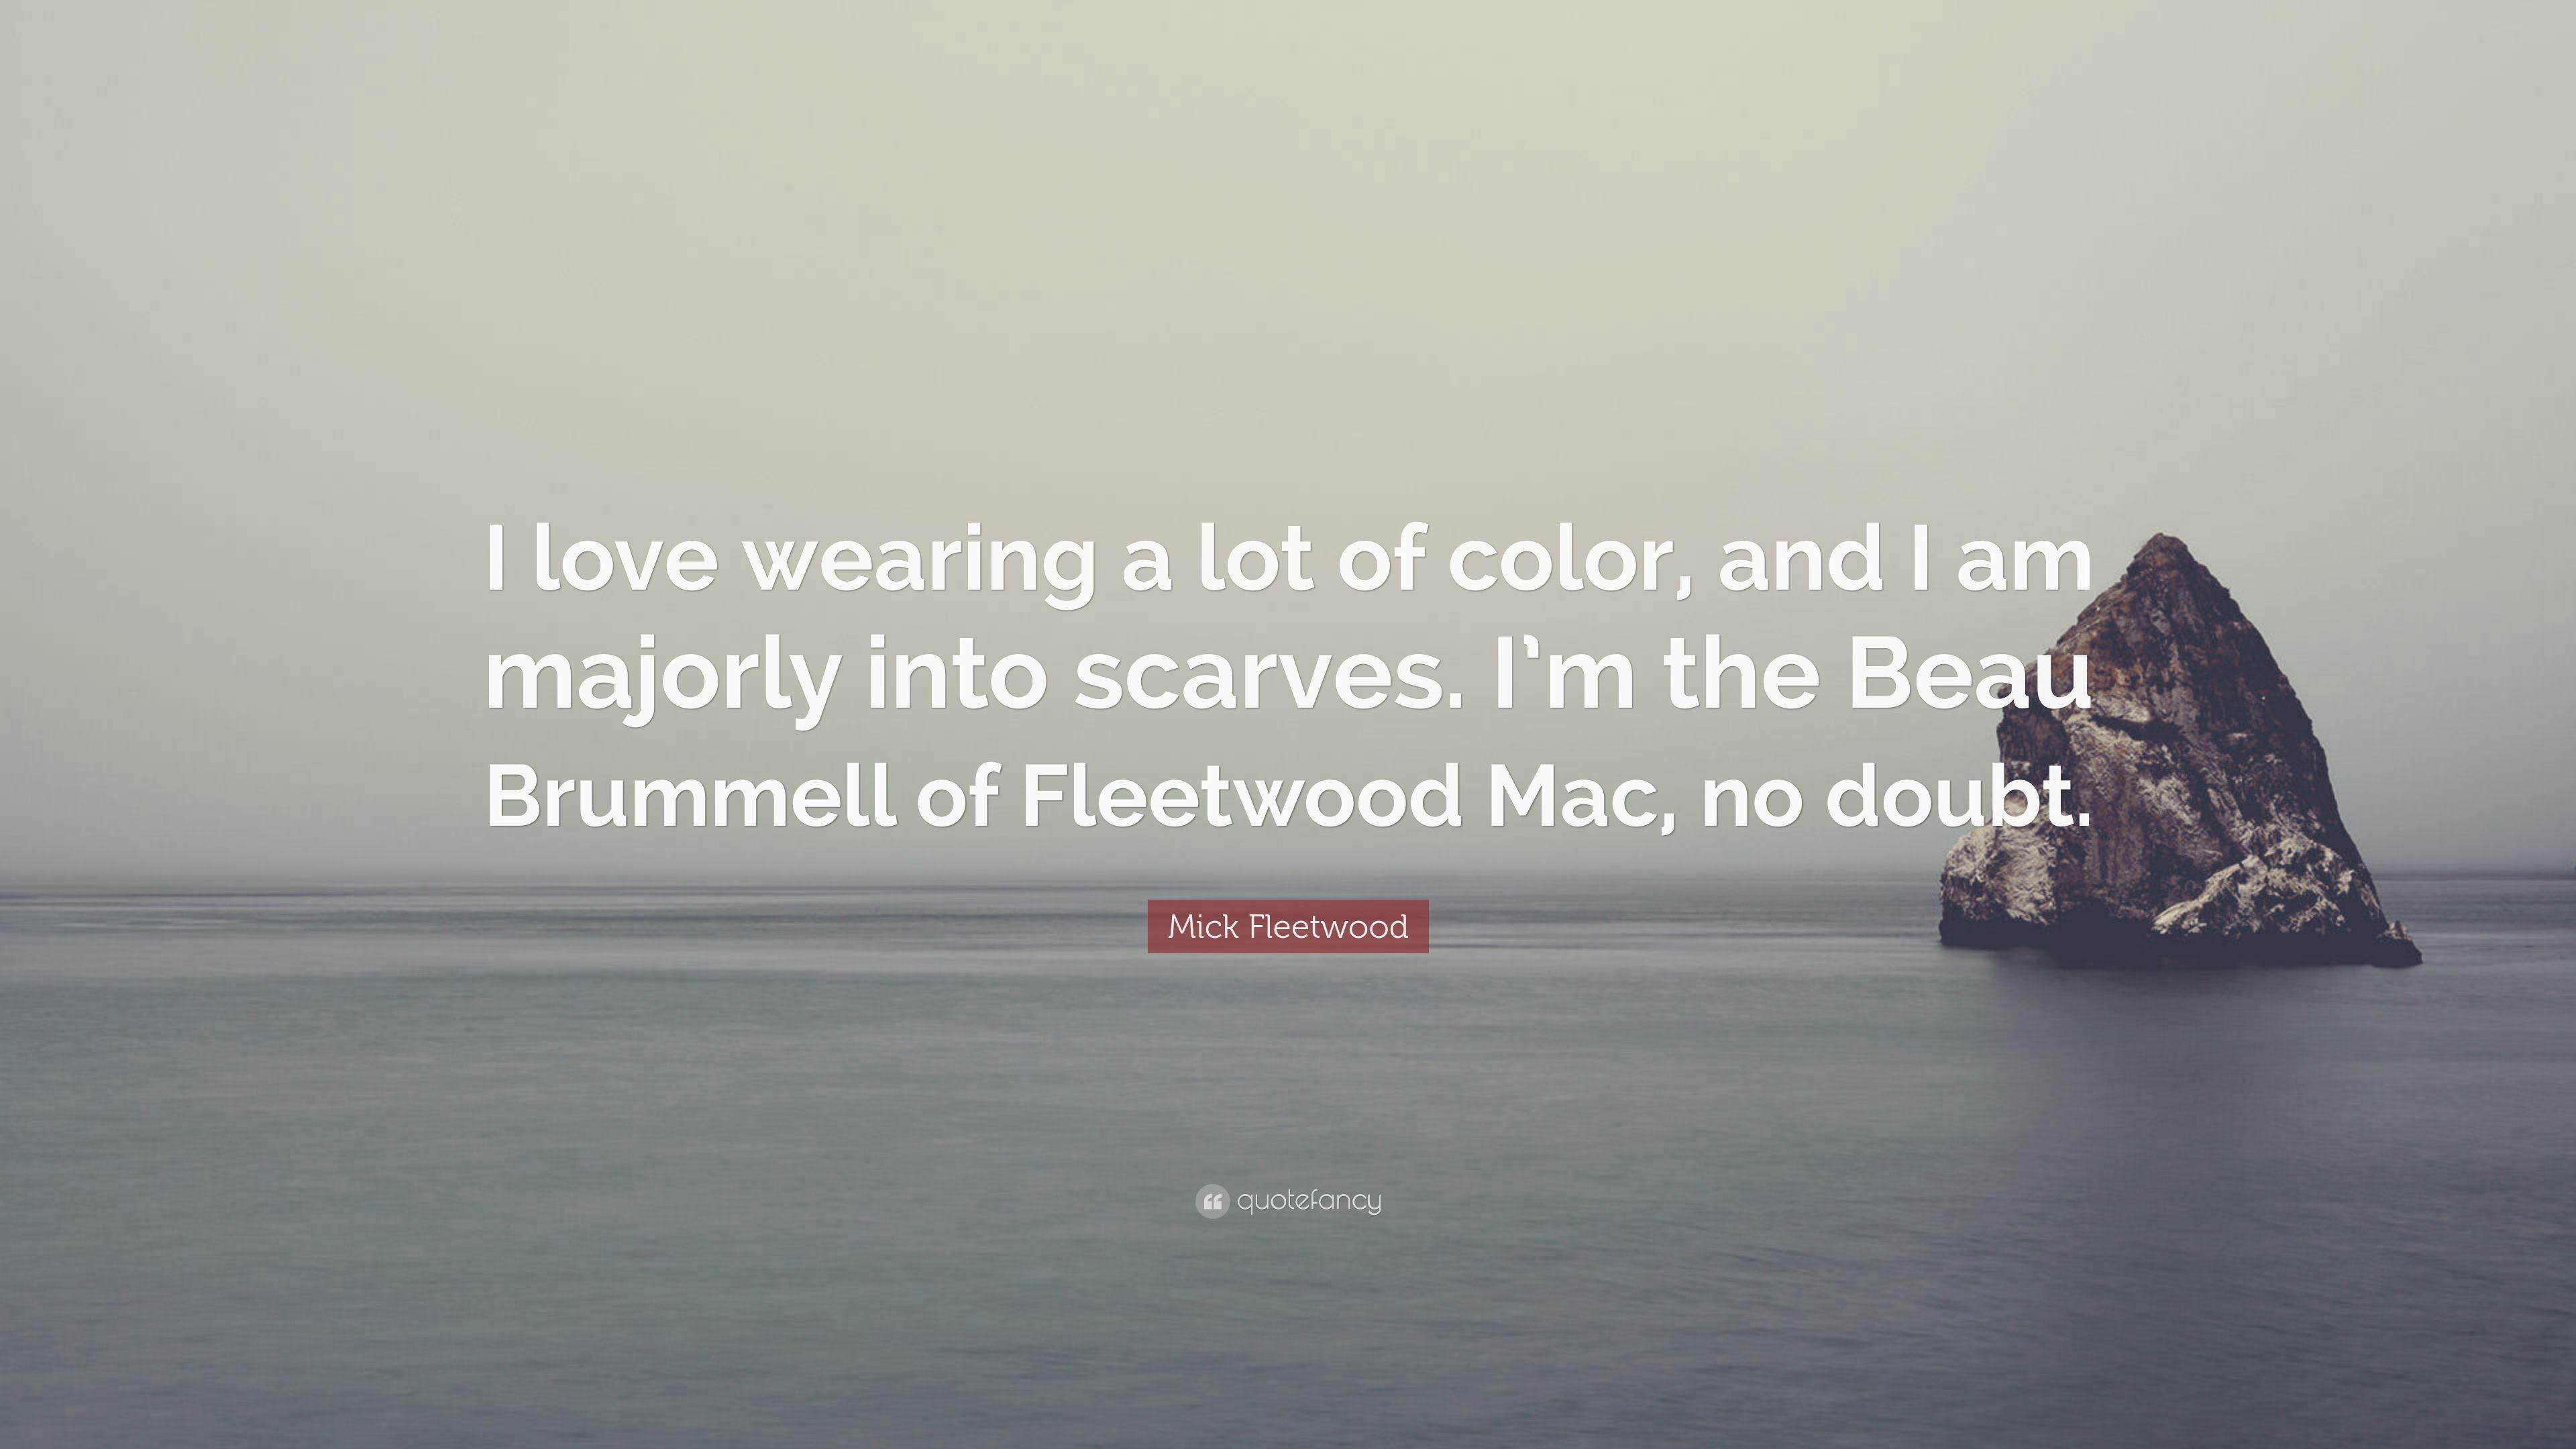 Mick Fleetwood Quote: “I love wearing a lot of color, and I